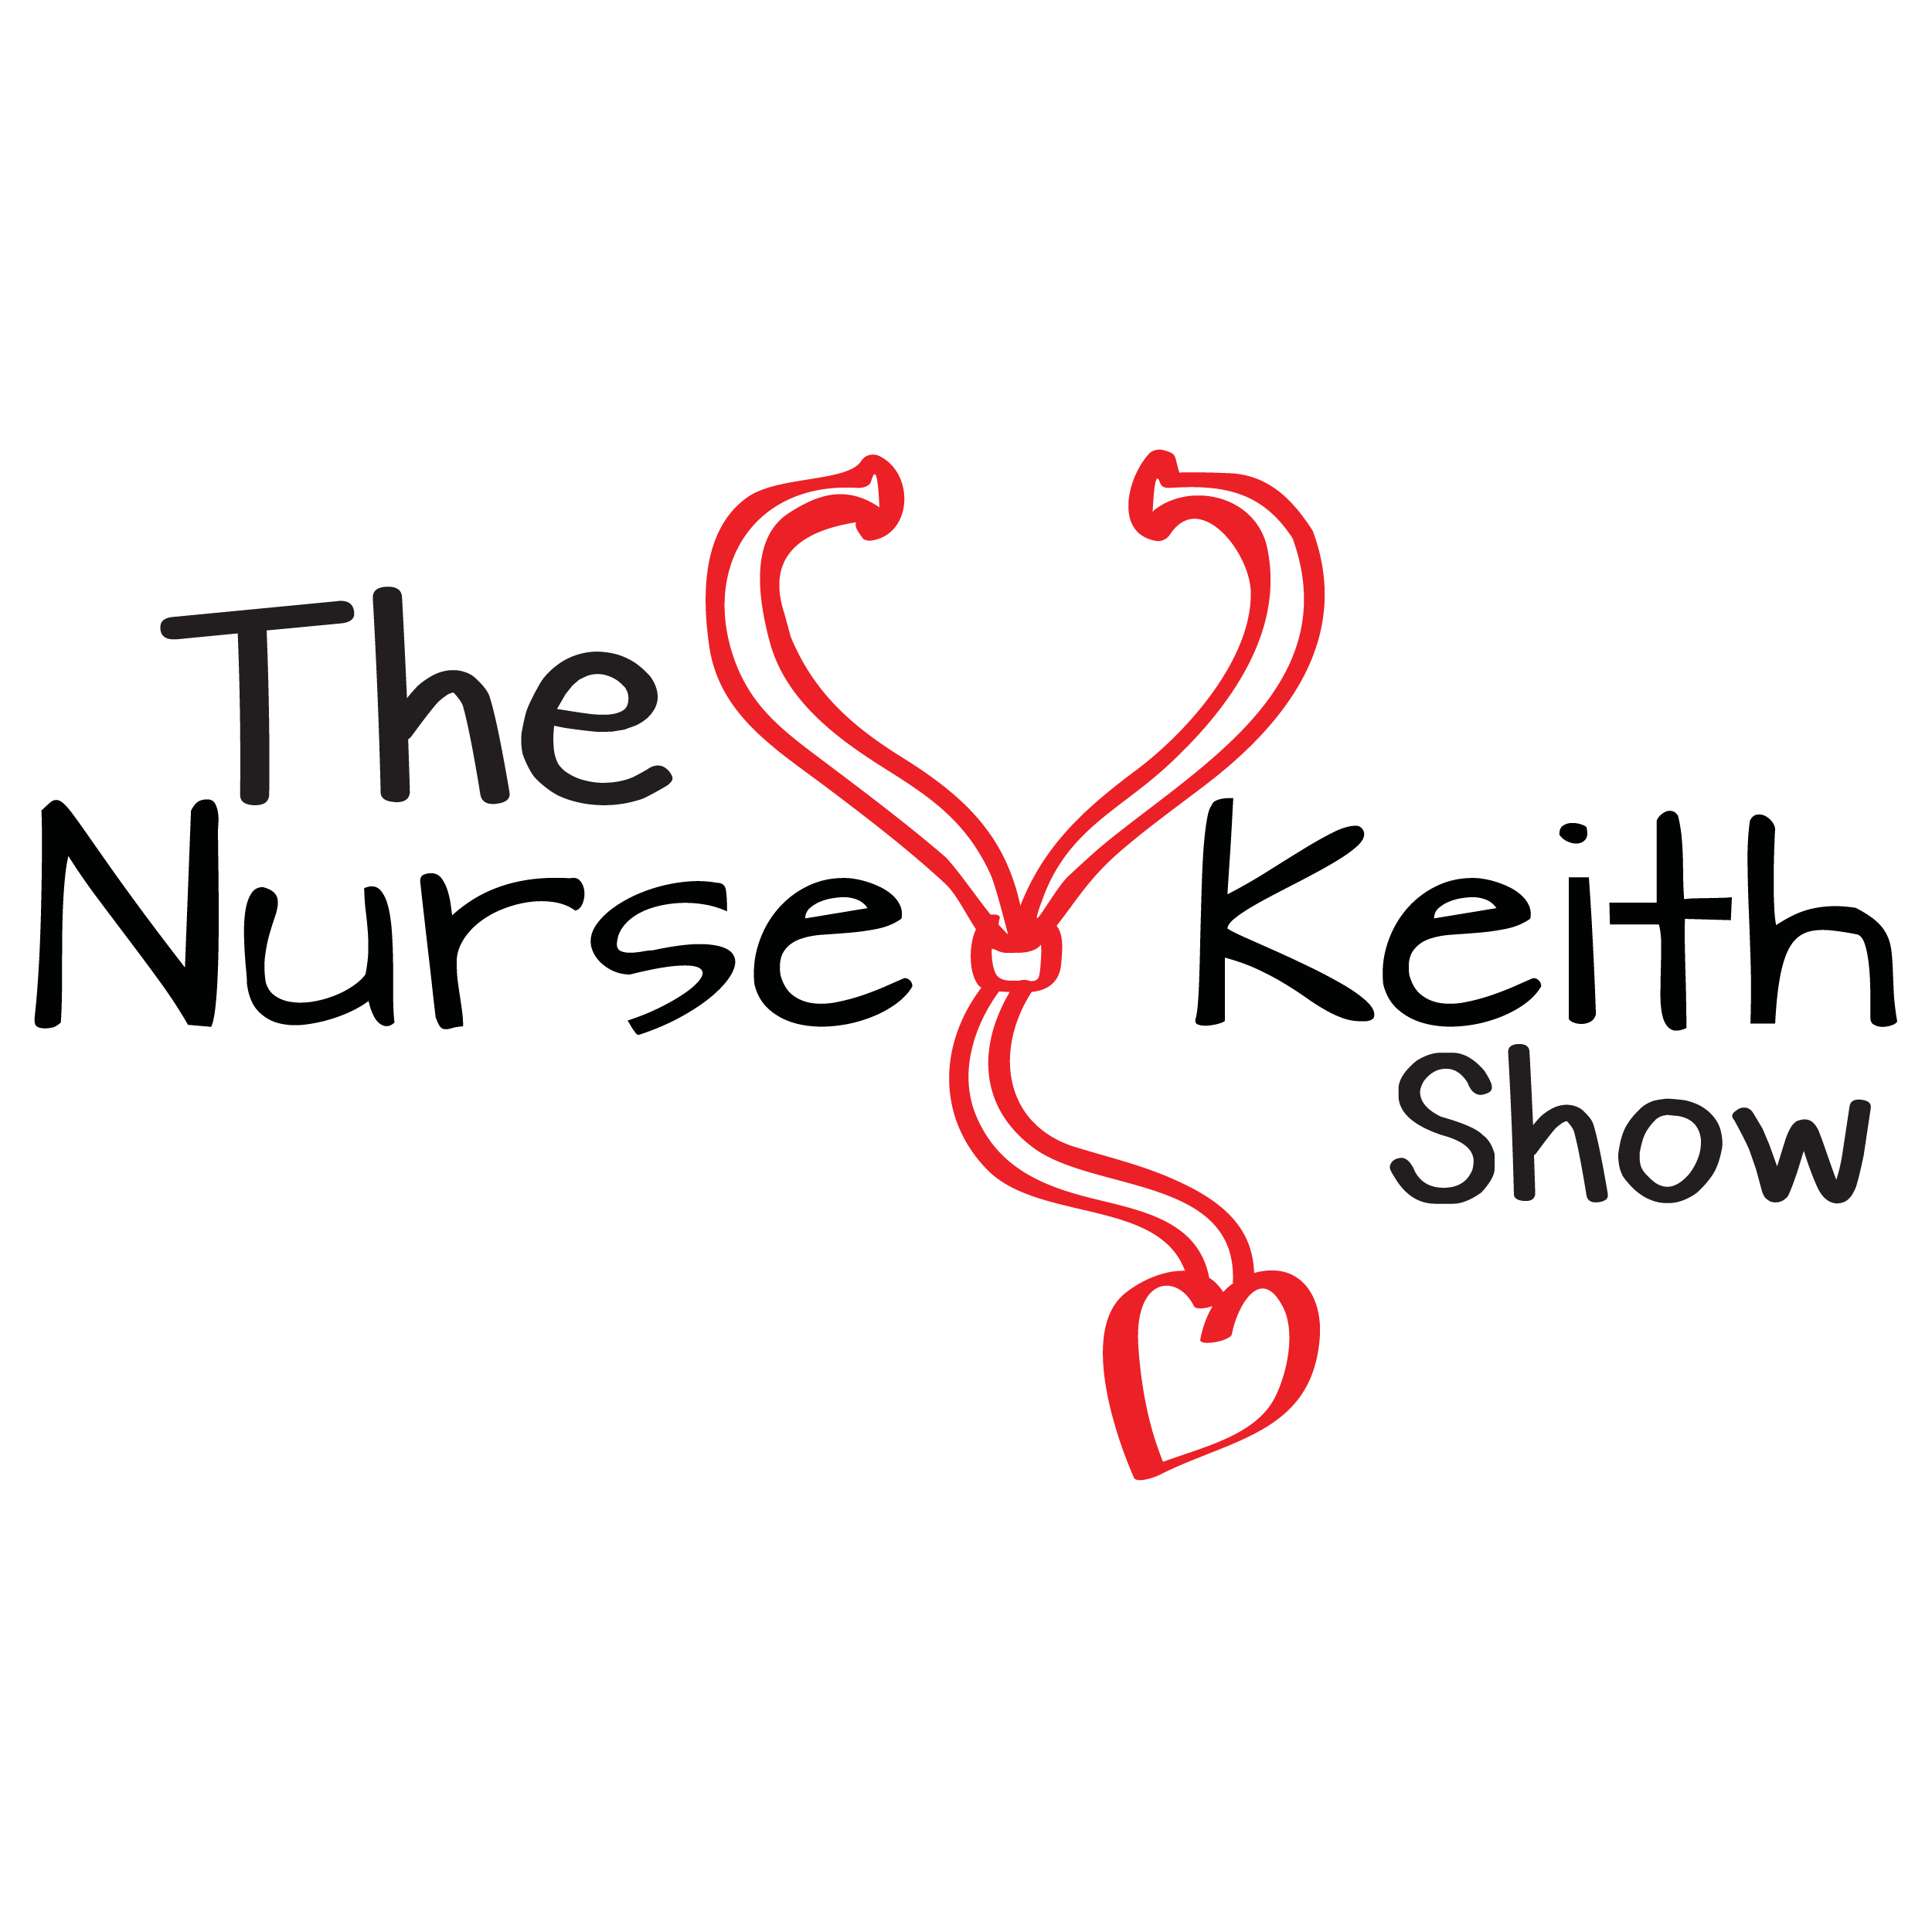 The 2016 BLS Nursing Jobs Data Are Here, The Nurse Keith Show, EPS 102